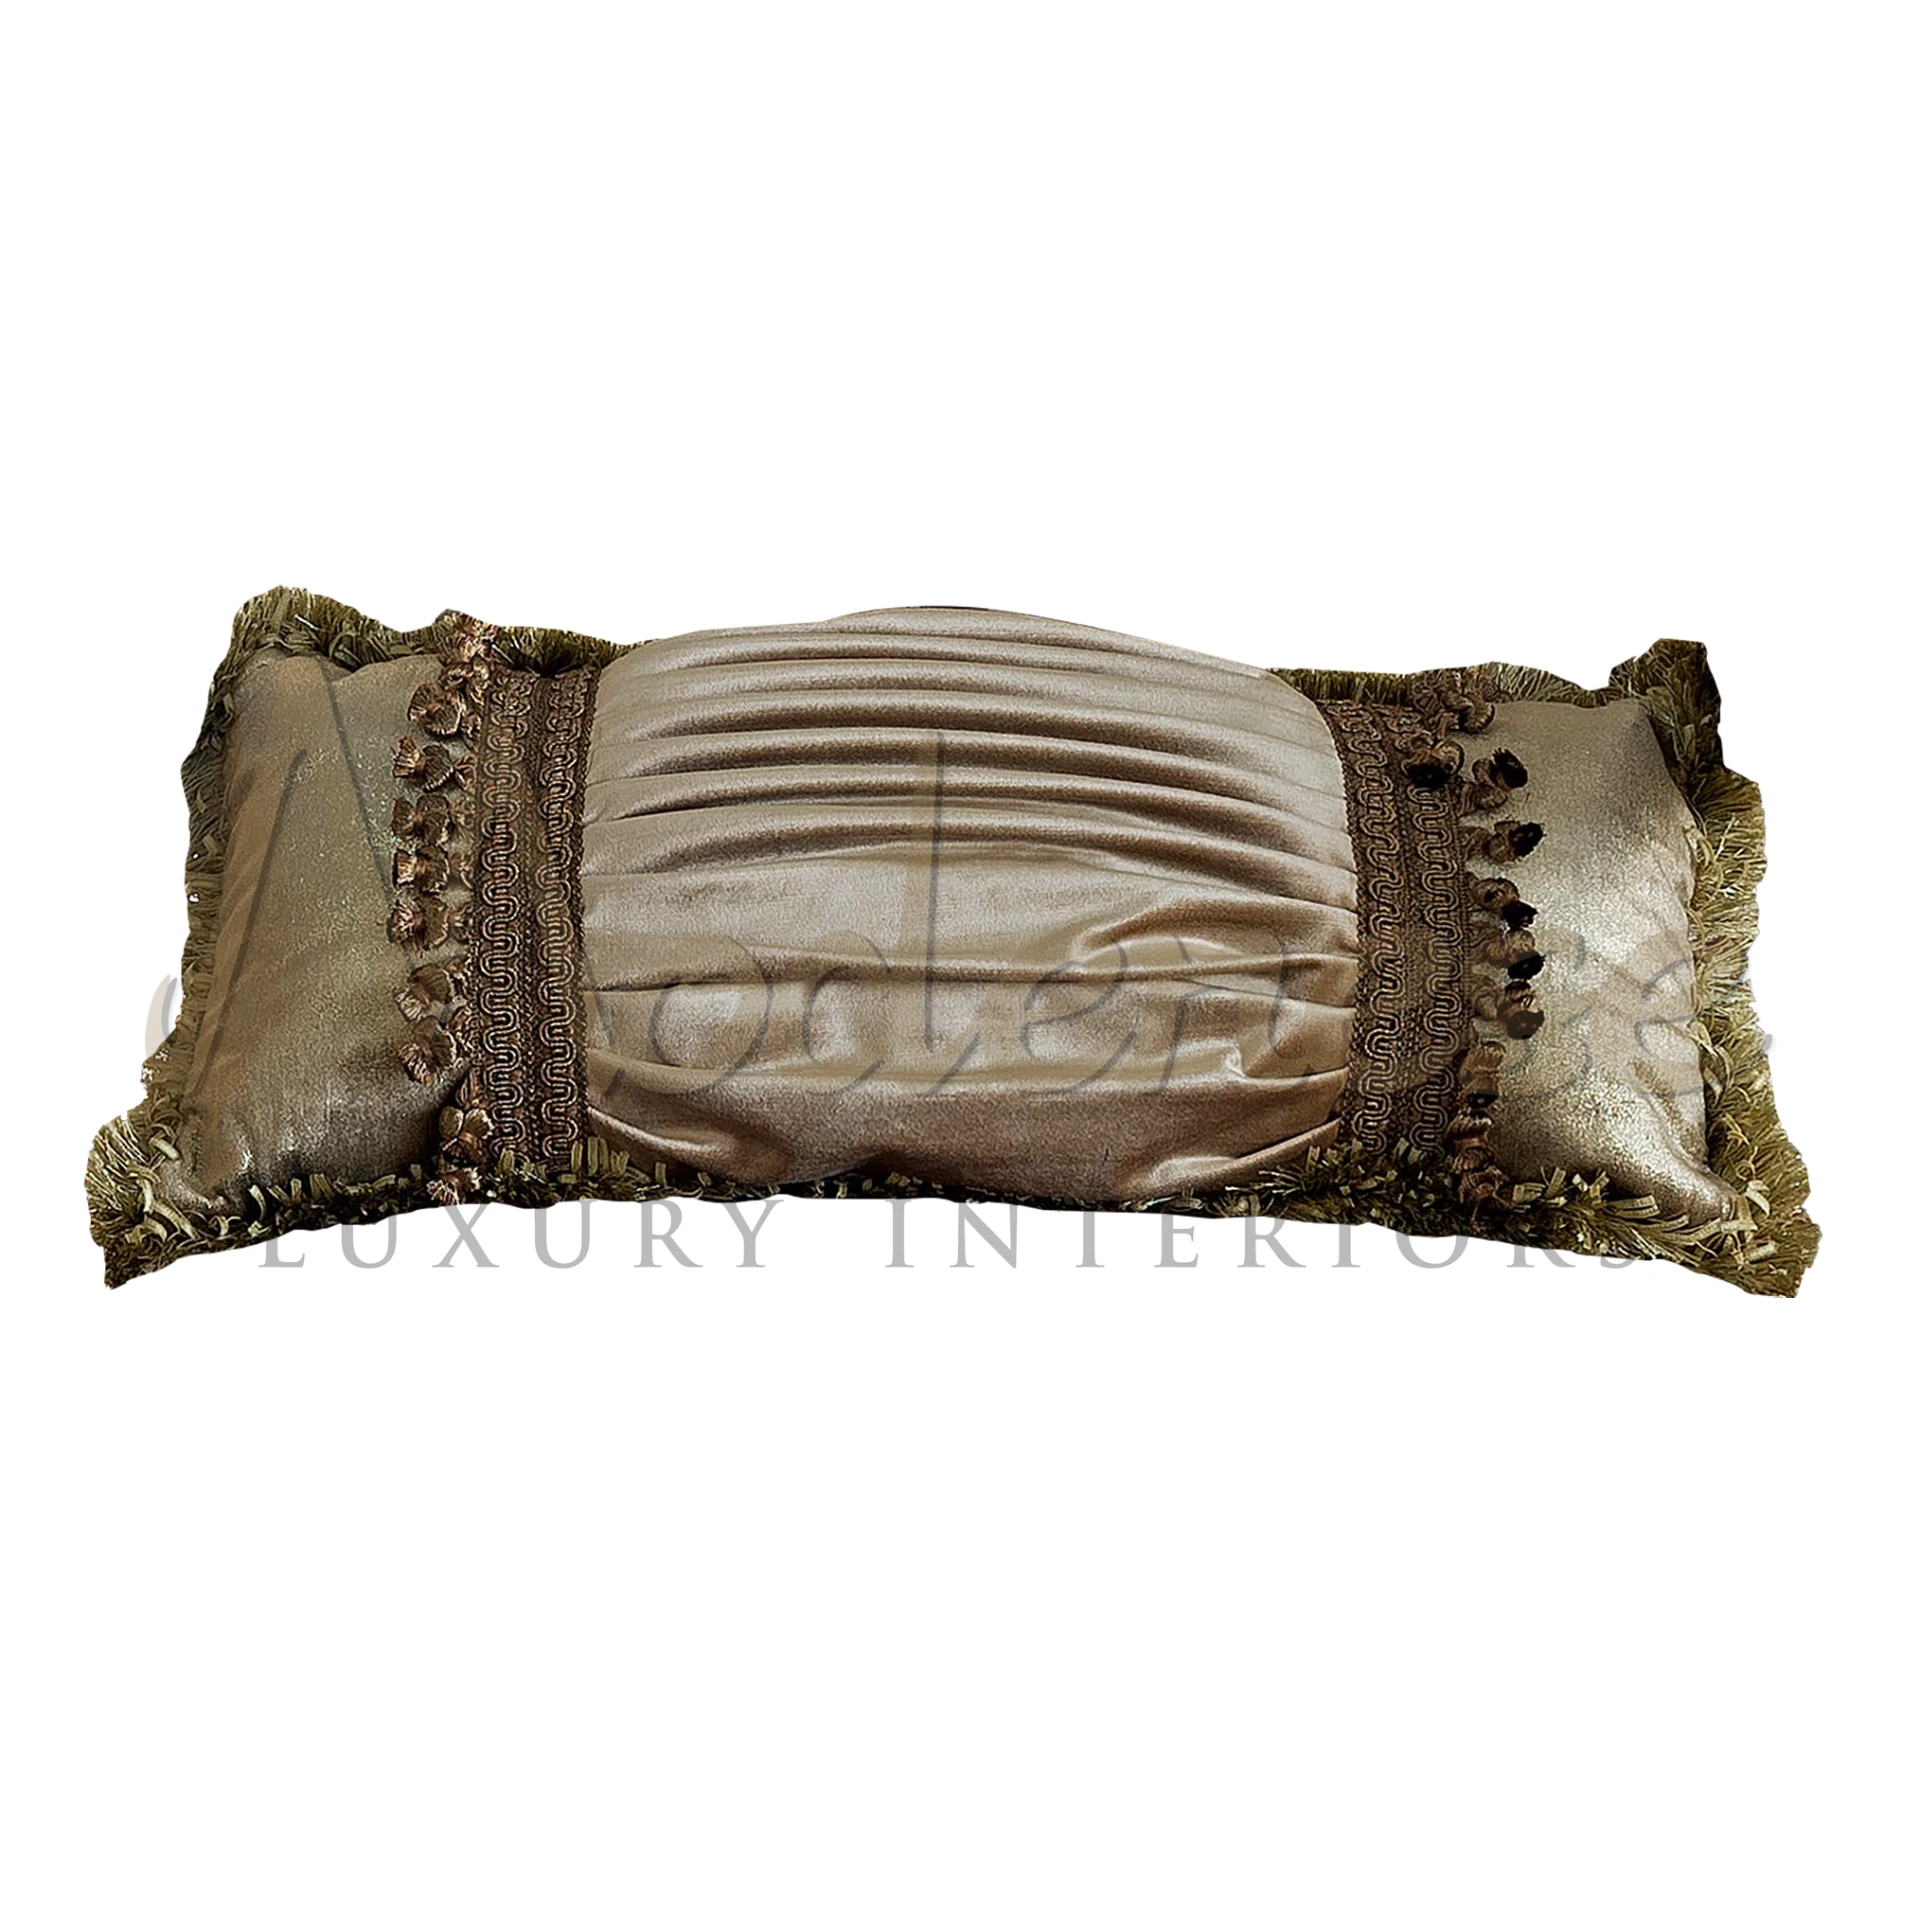 Modenese Designer Pillow: epitome of contemporary luxury with exquisite detailing and superior Italian craftsmanship.